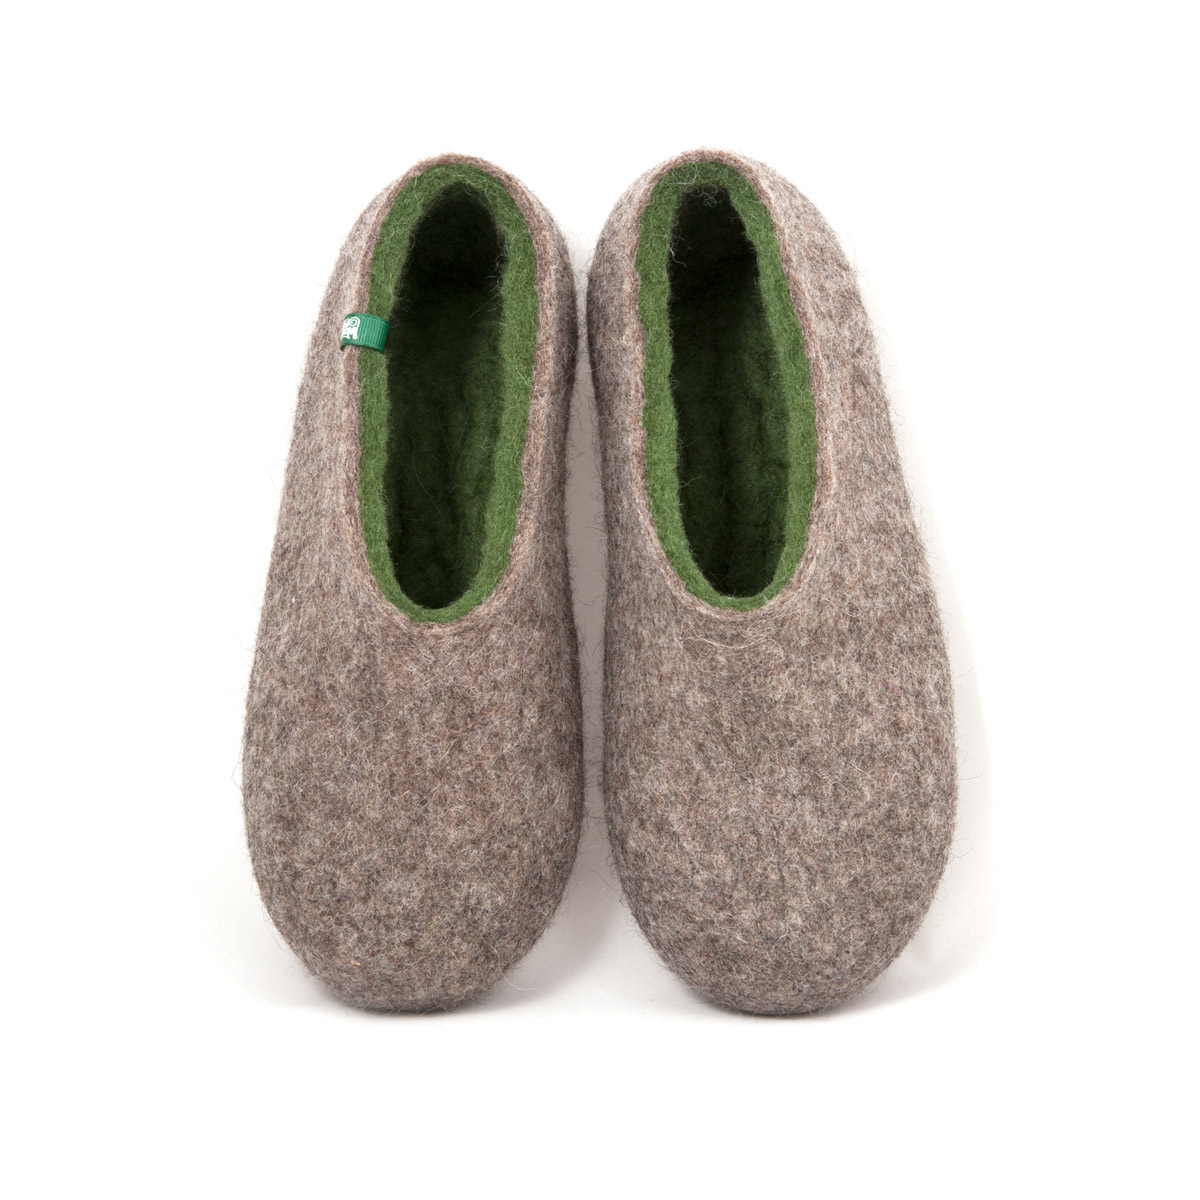 Woolen slippers DUAL NATURAL gray olive green 58783